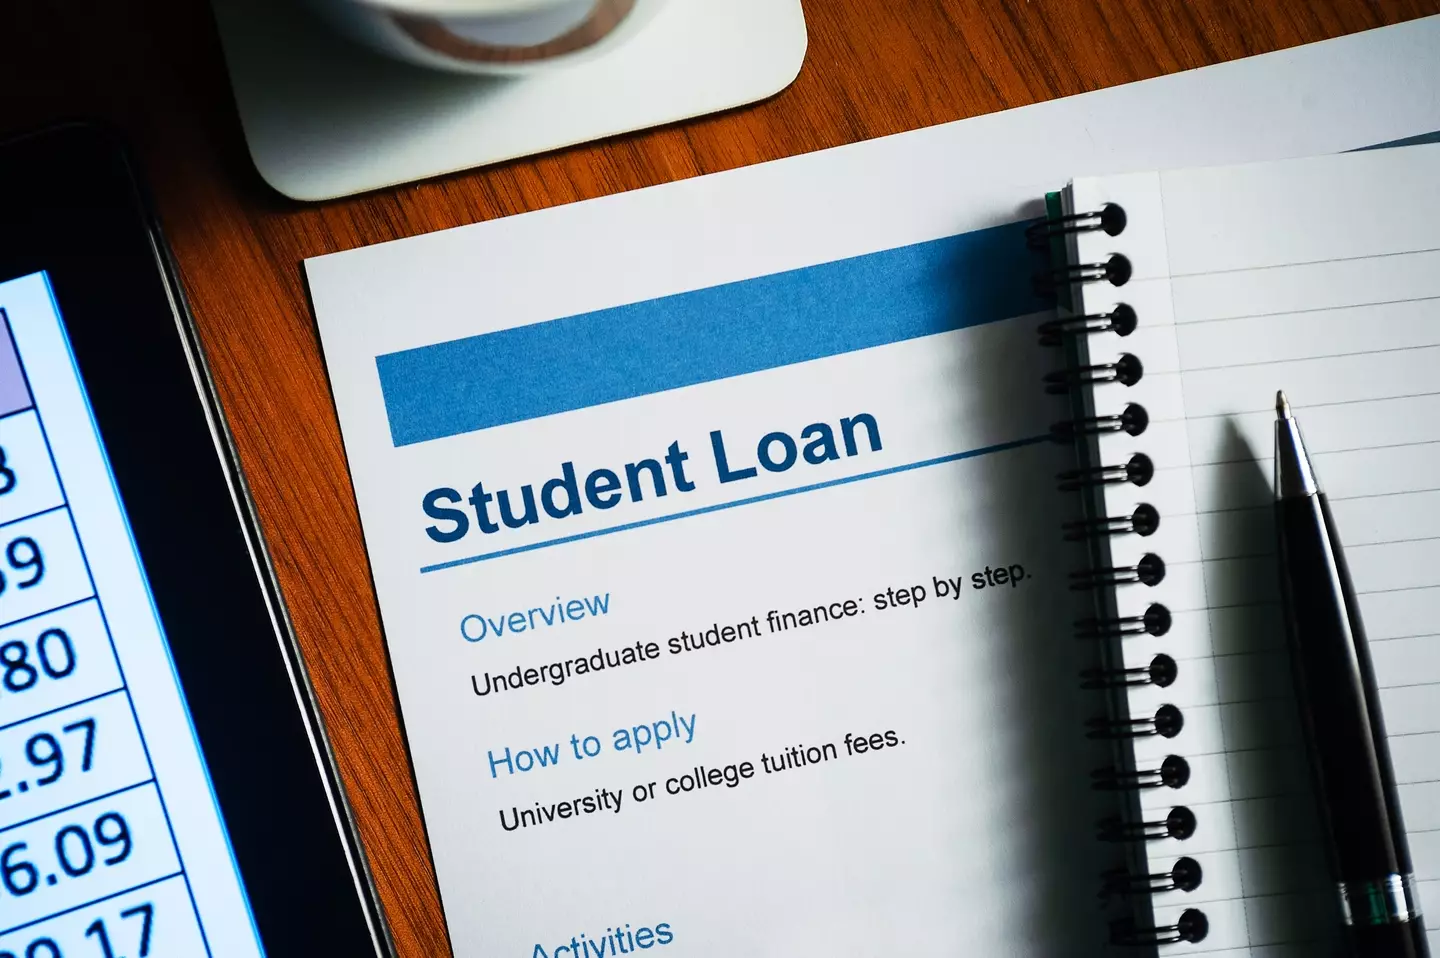 Student loan repayments are common.